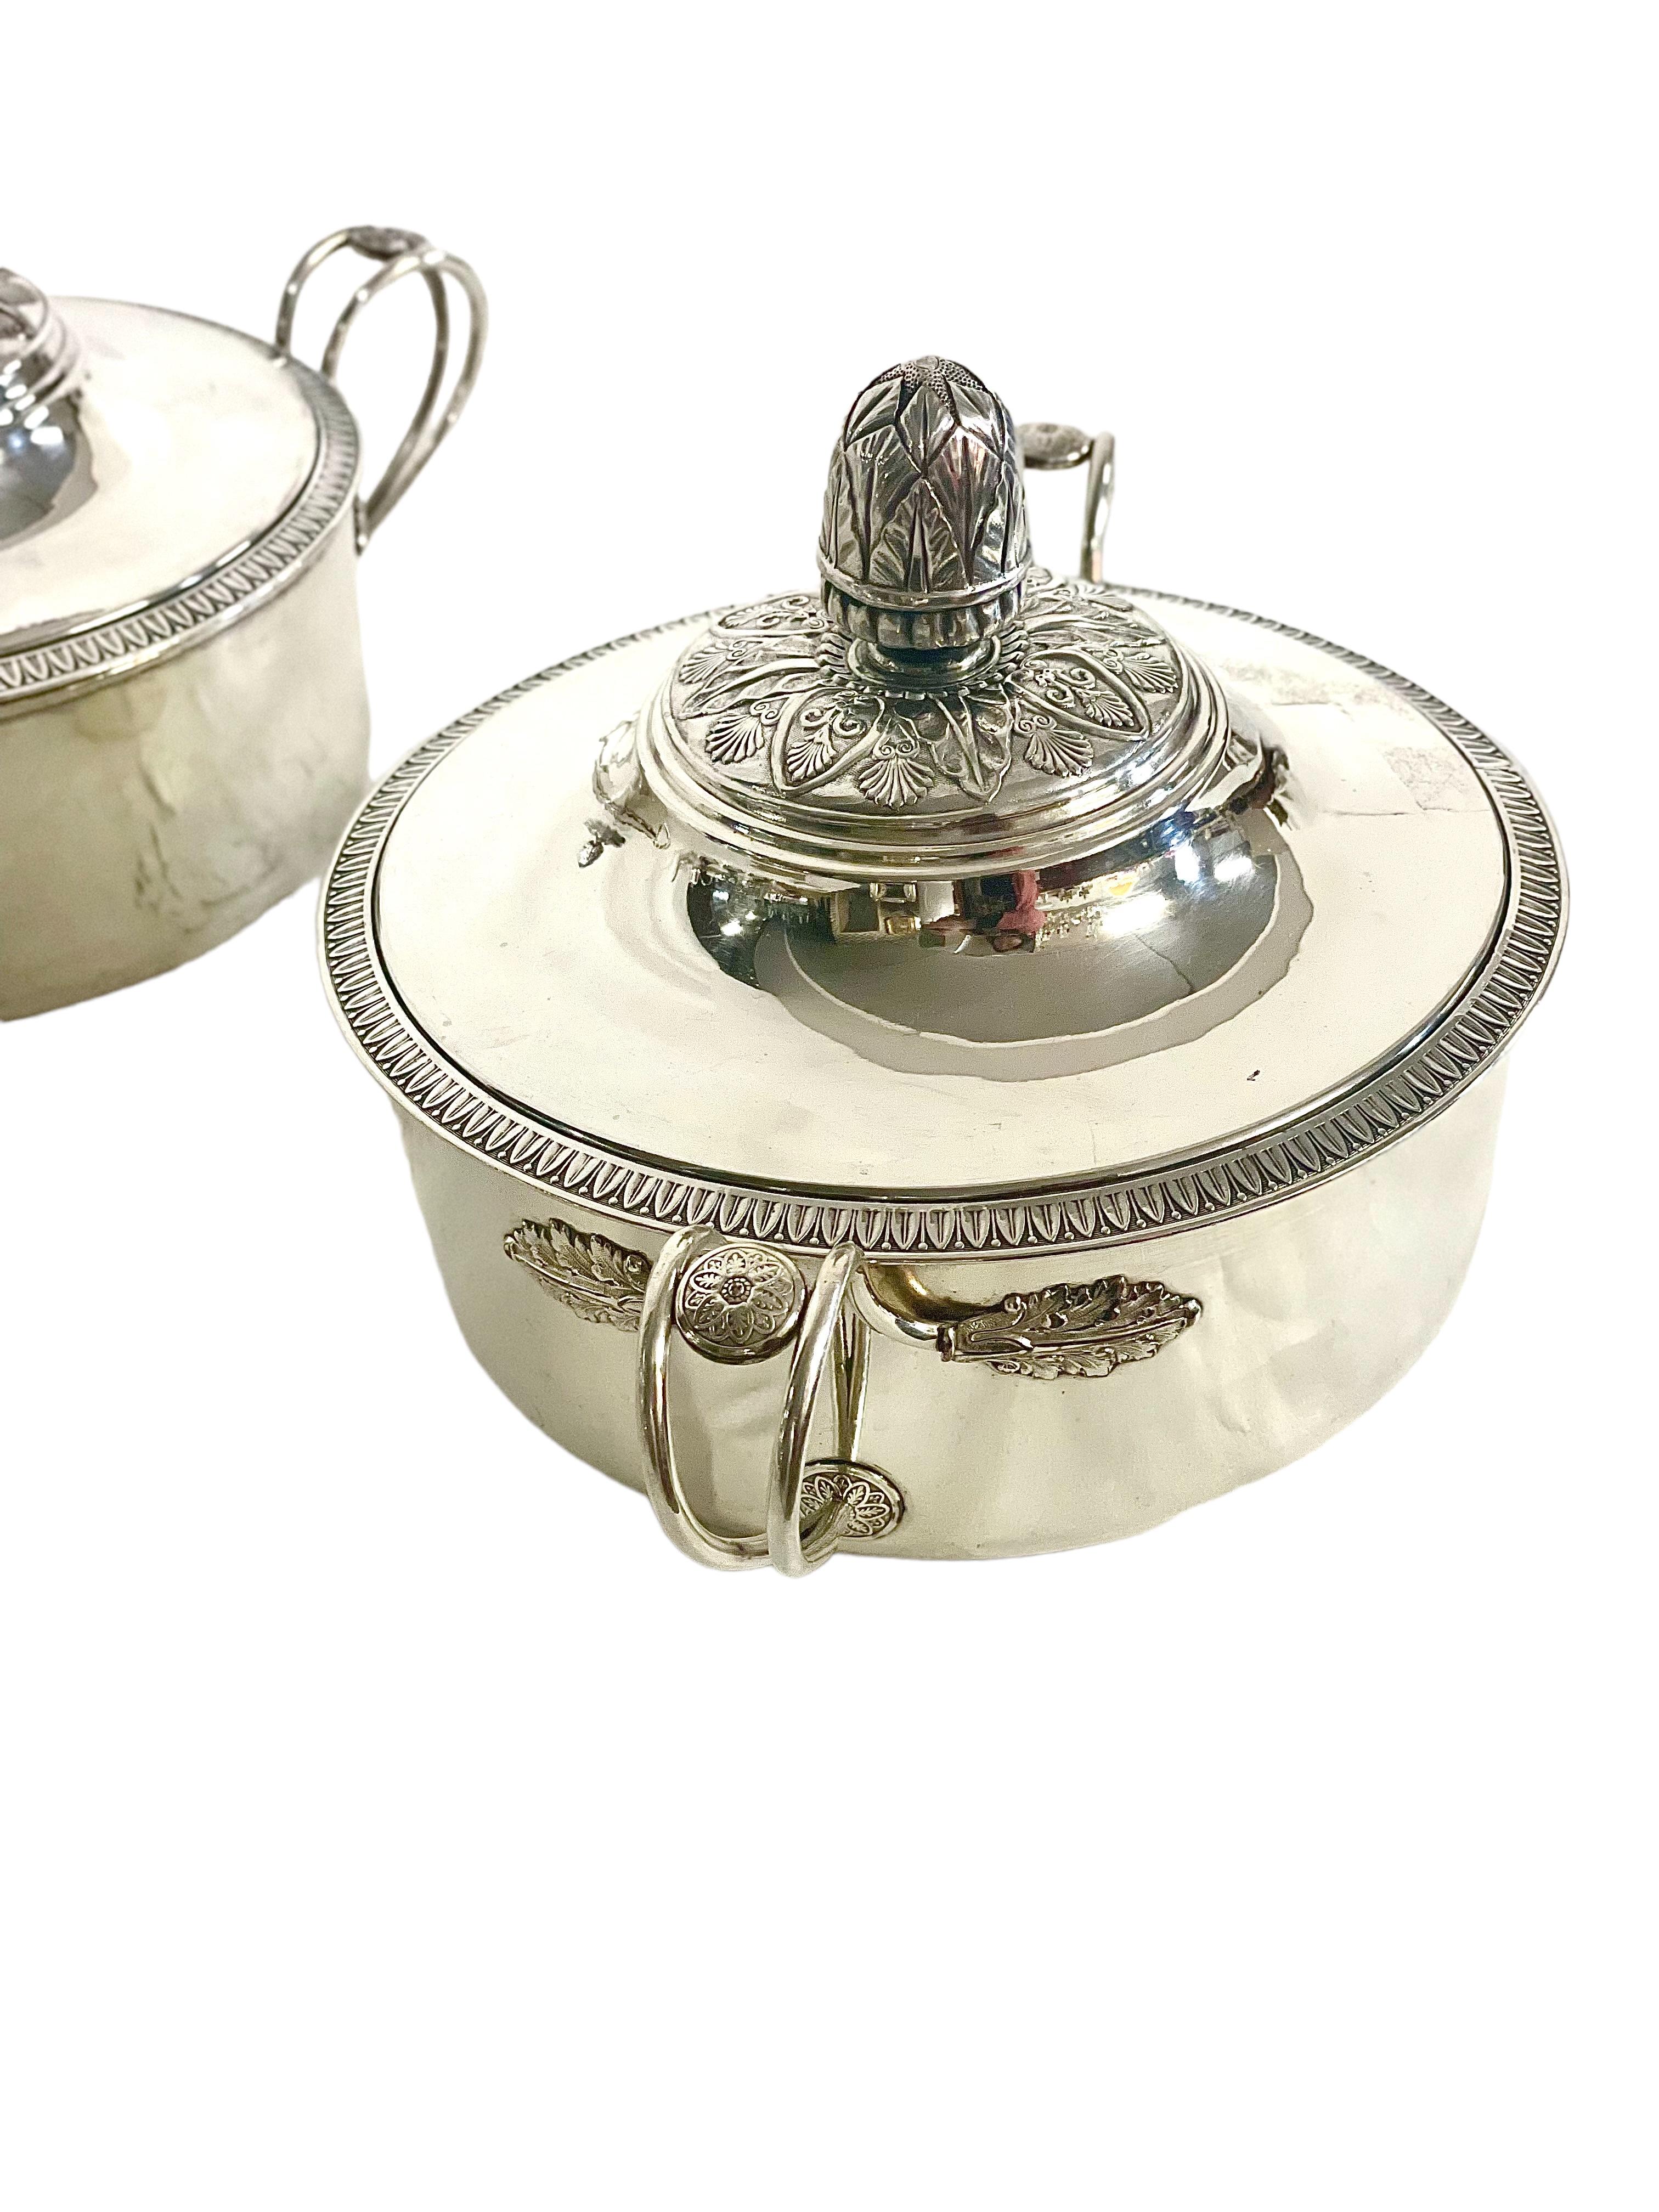 Louis XVI Pair of Silver Plated Vegetable or Soup Tureens For Sale